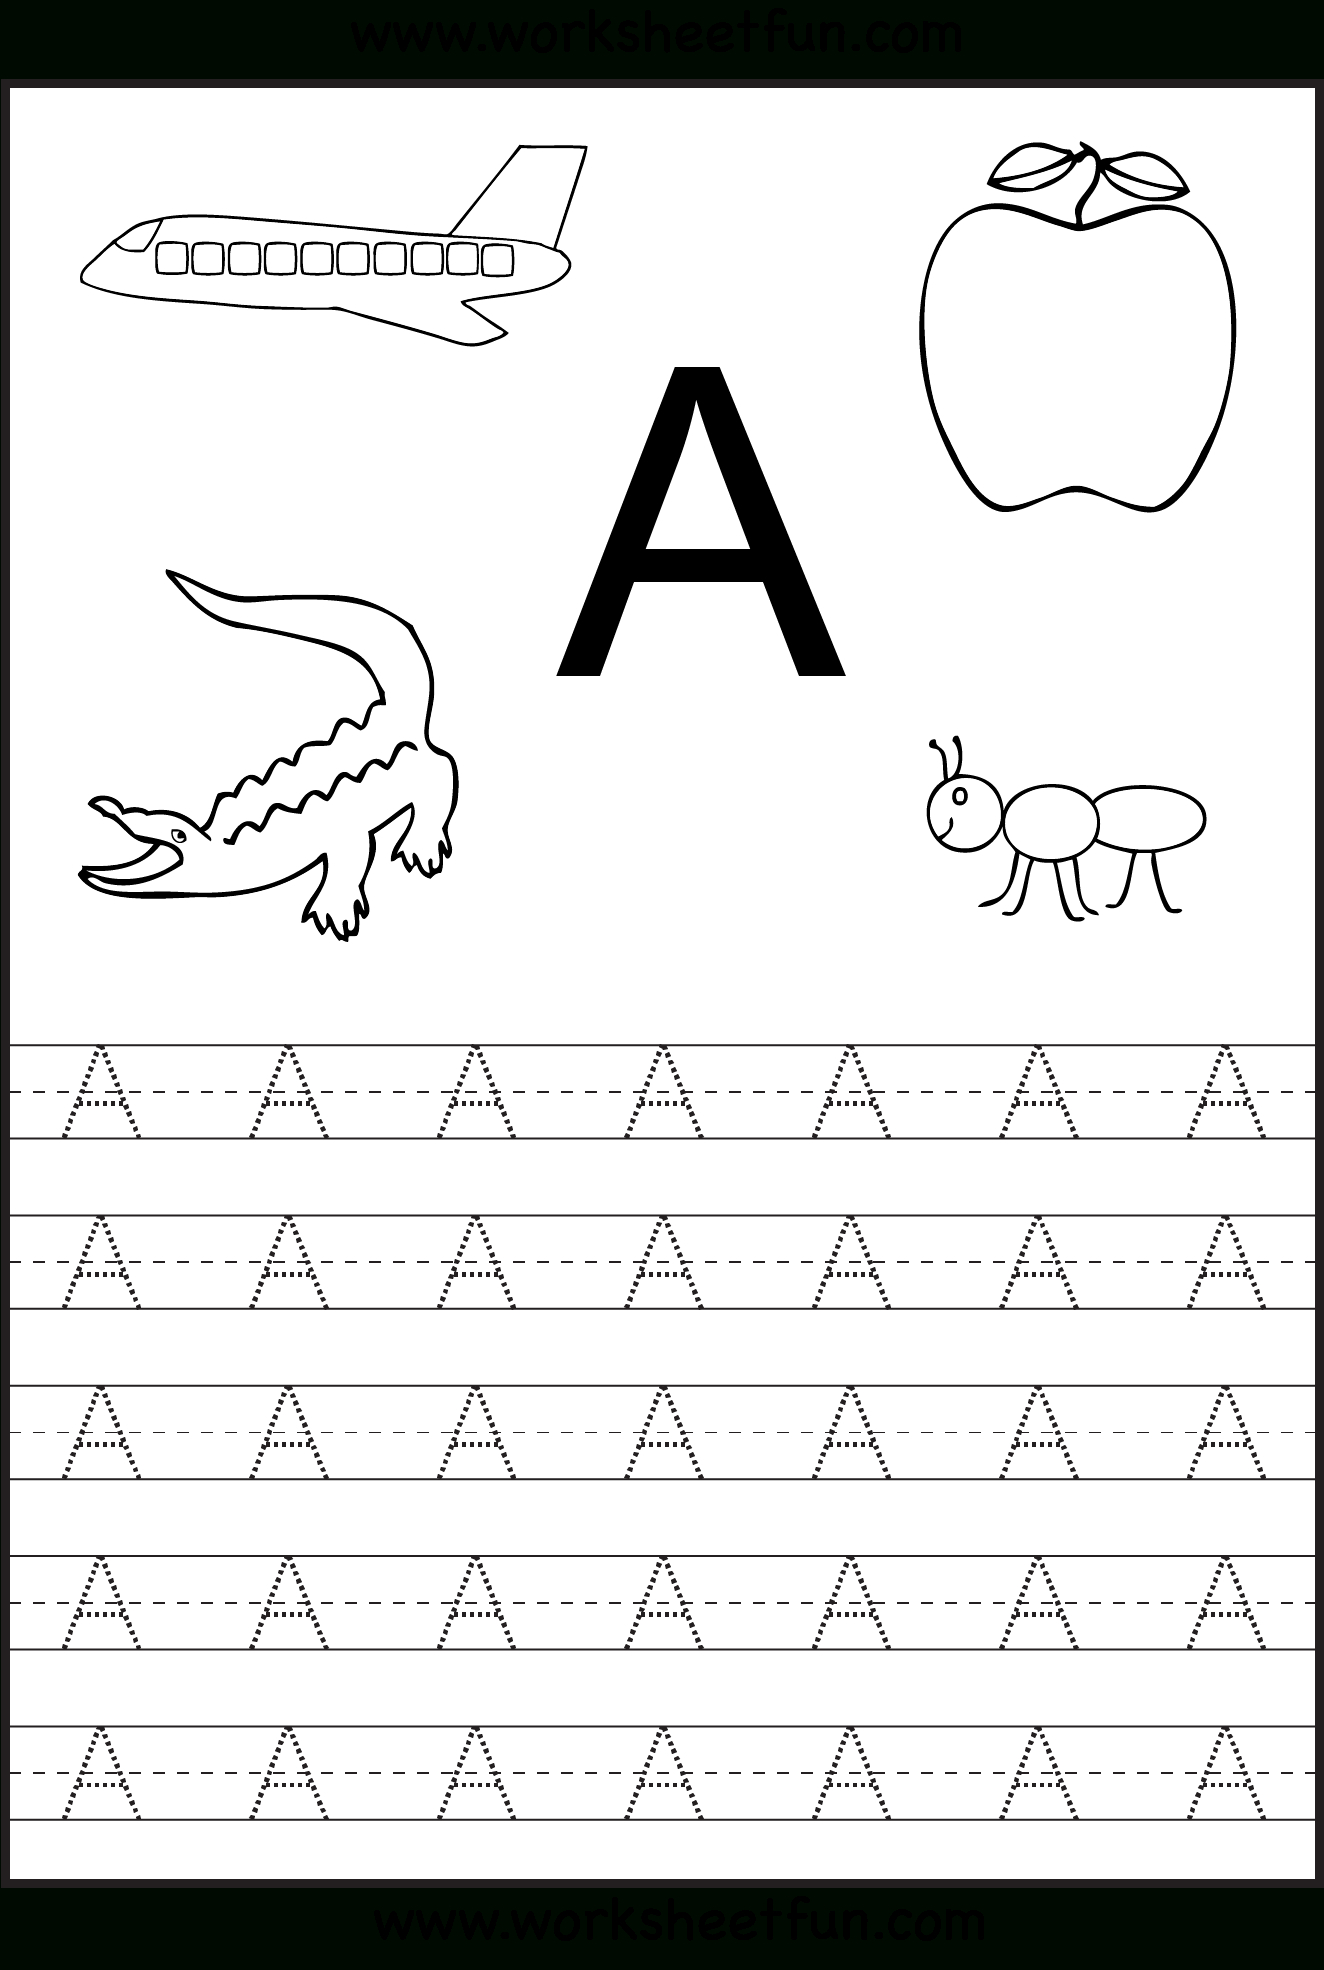 Free Printable Worksheets: Letter Tracing Worksheets For with regard to Free Printable Preschool Worksheets Tracing Letters